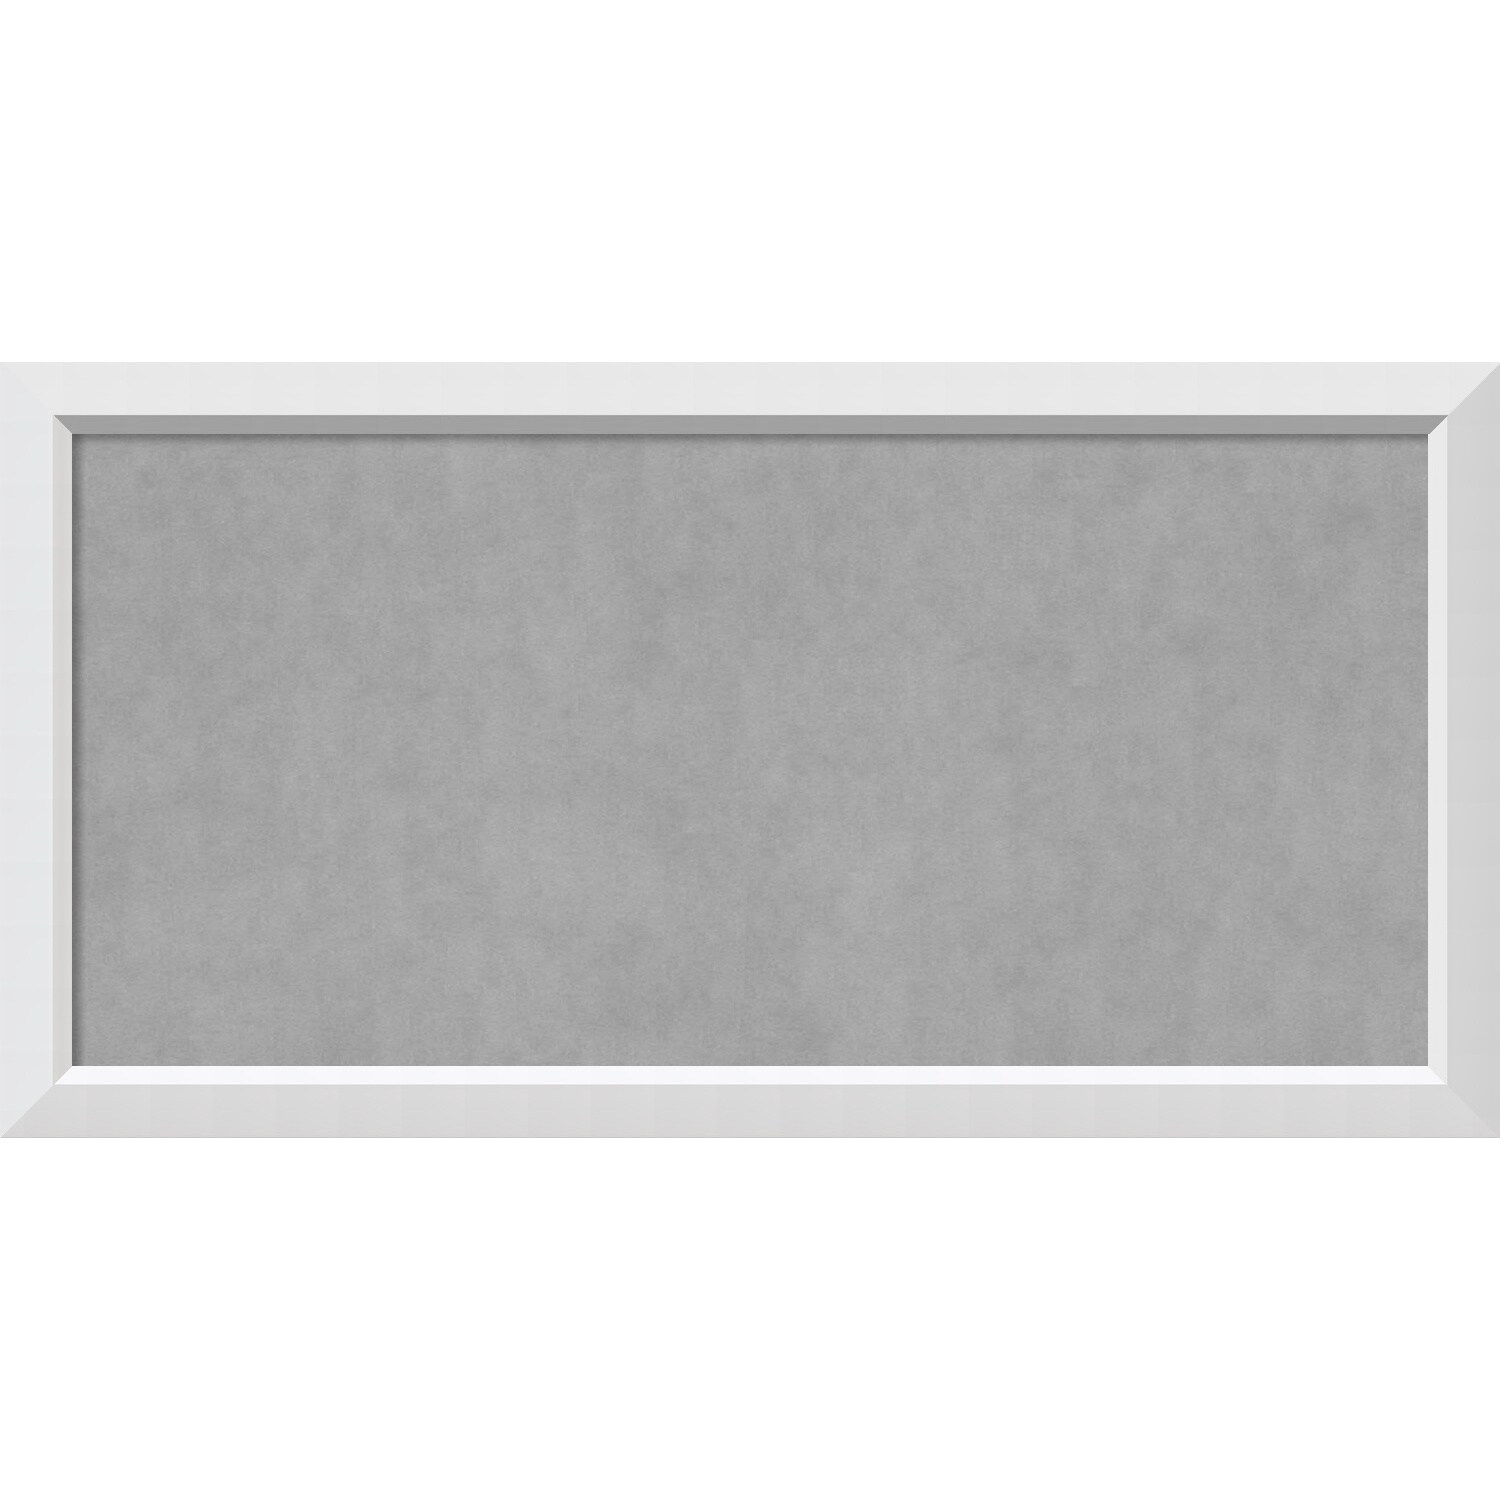 overalt Cornwall desillusion Framed Magnetic Board Choose Your Custom Size, Blanco White Wood - On Sale  - Overstock - 14155330